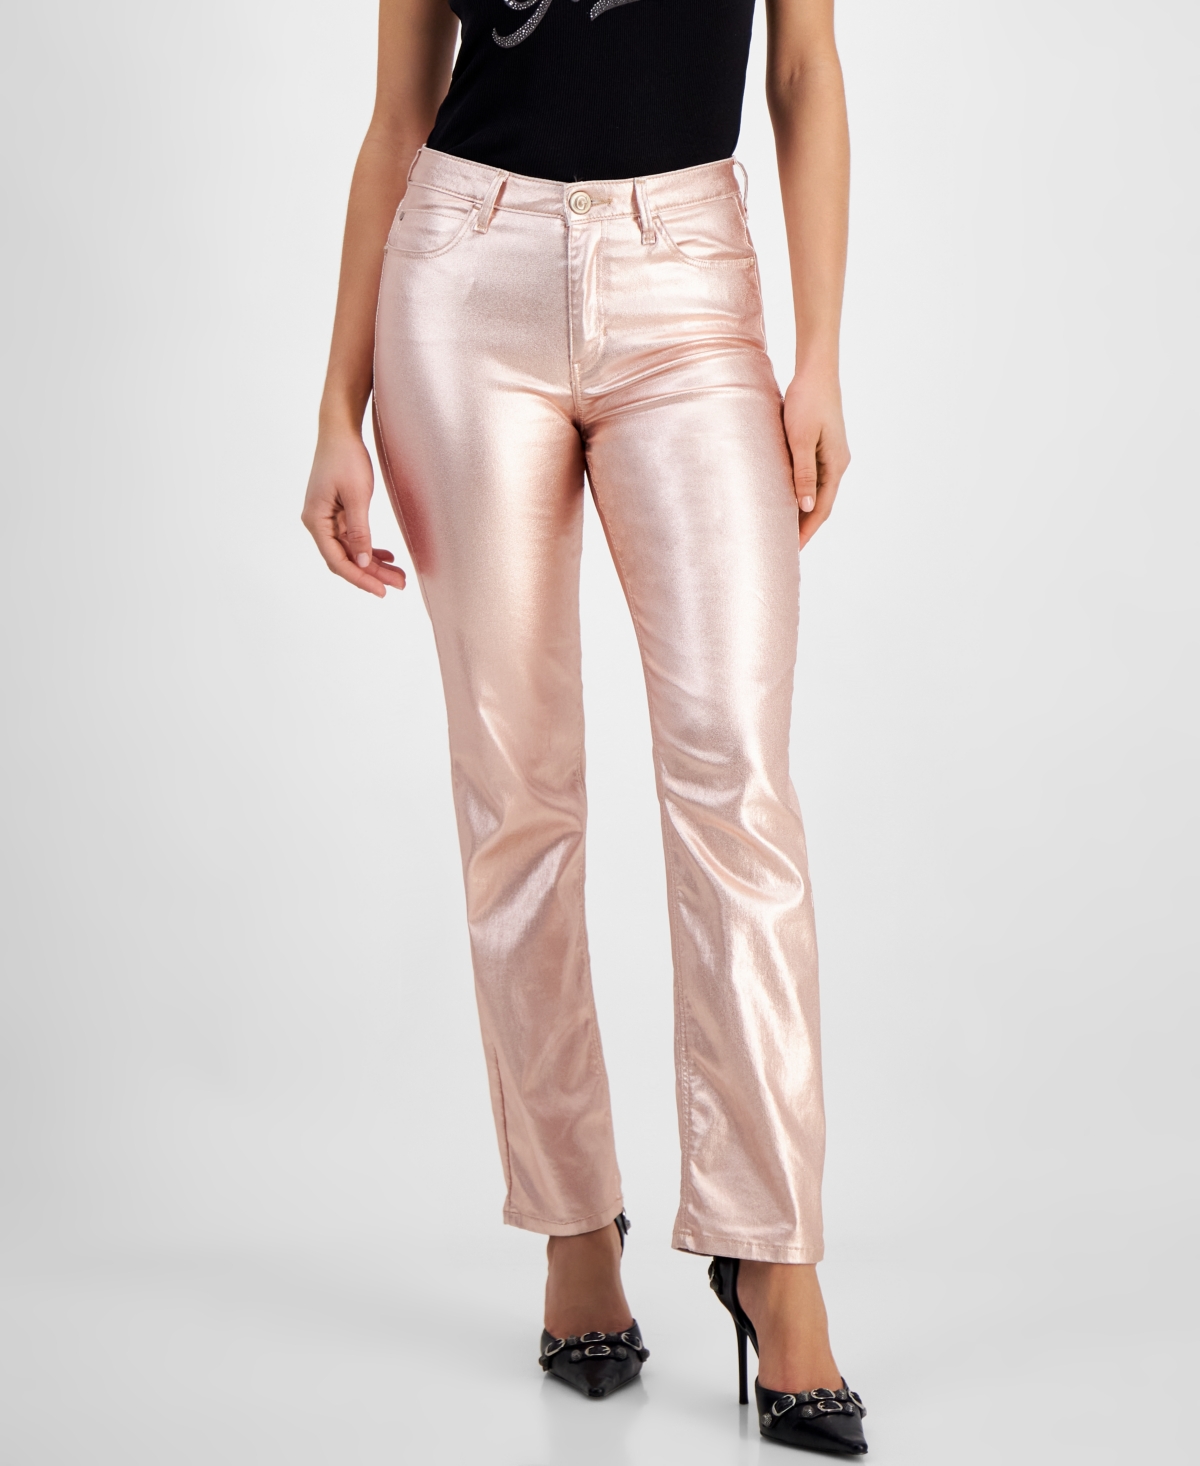 Guess Women's 1981 Metallic Straight Jeans In Papete. Pink